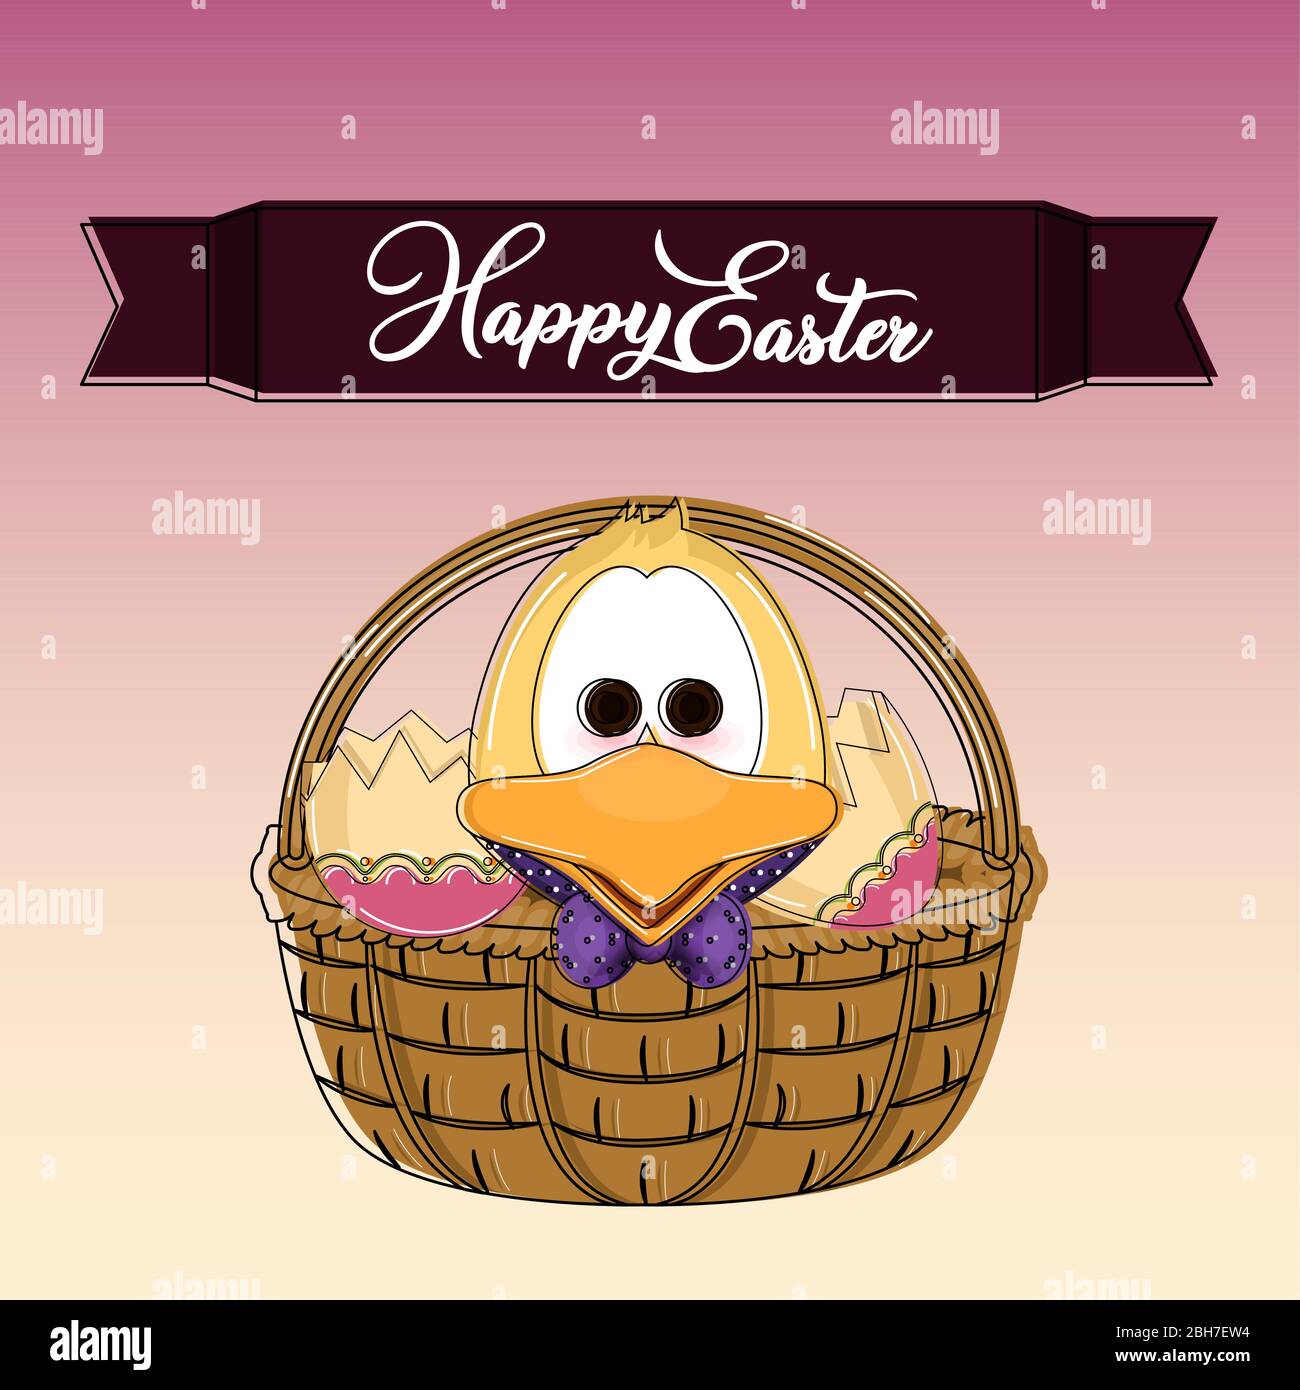 Happy easter poster Stock Vector